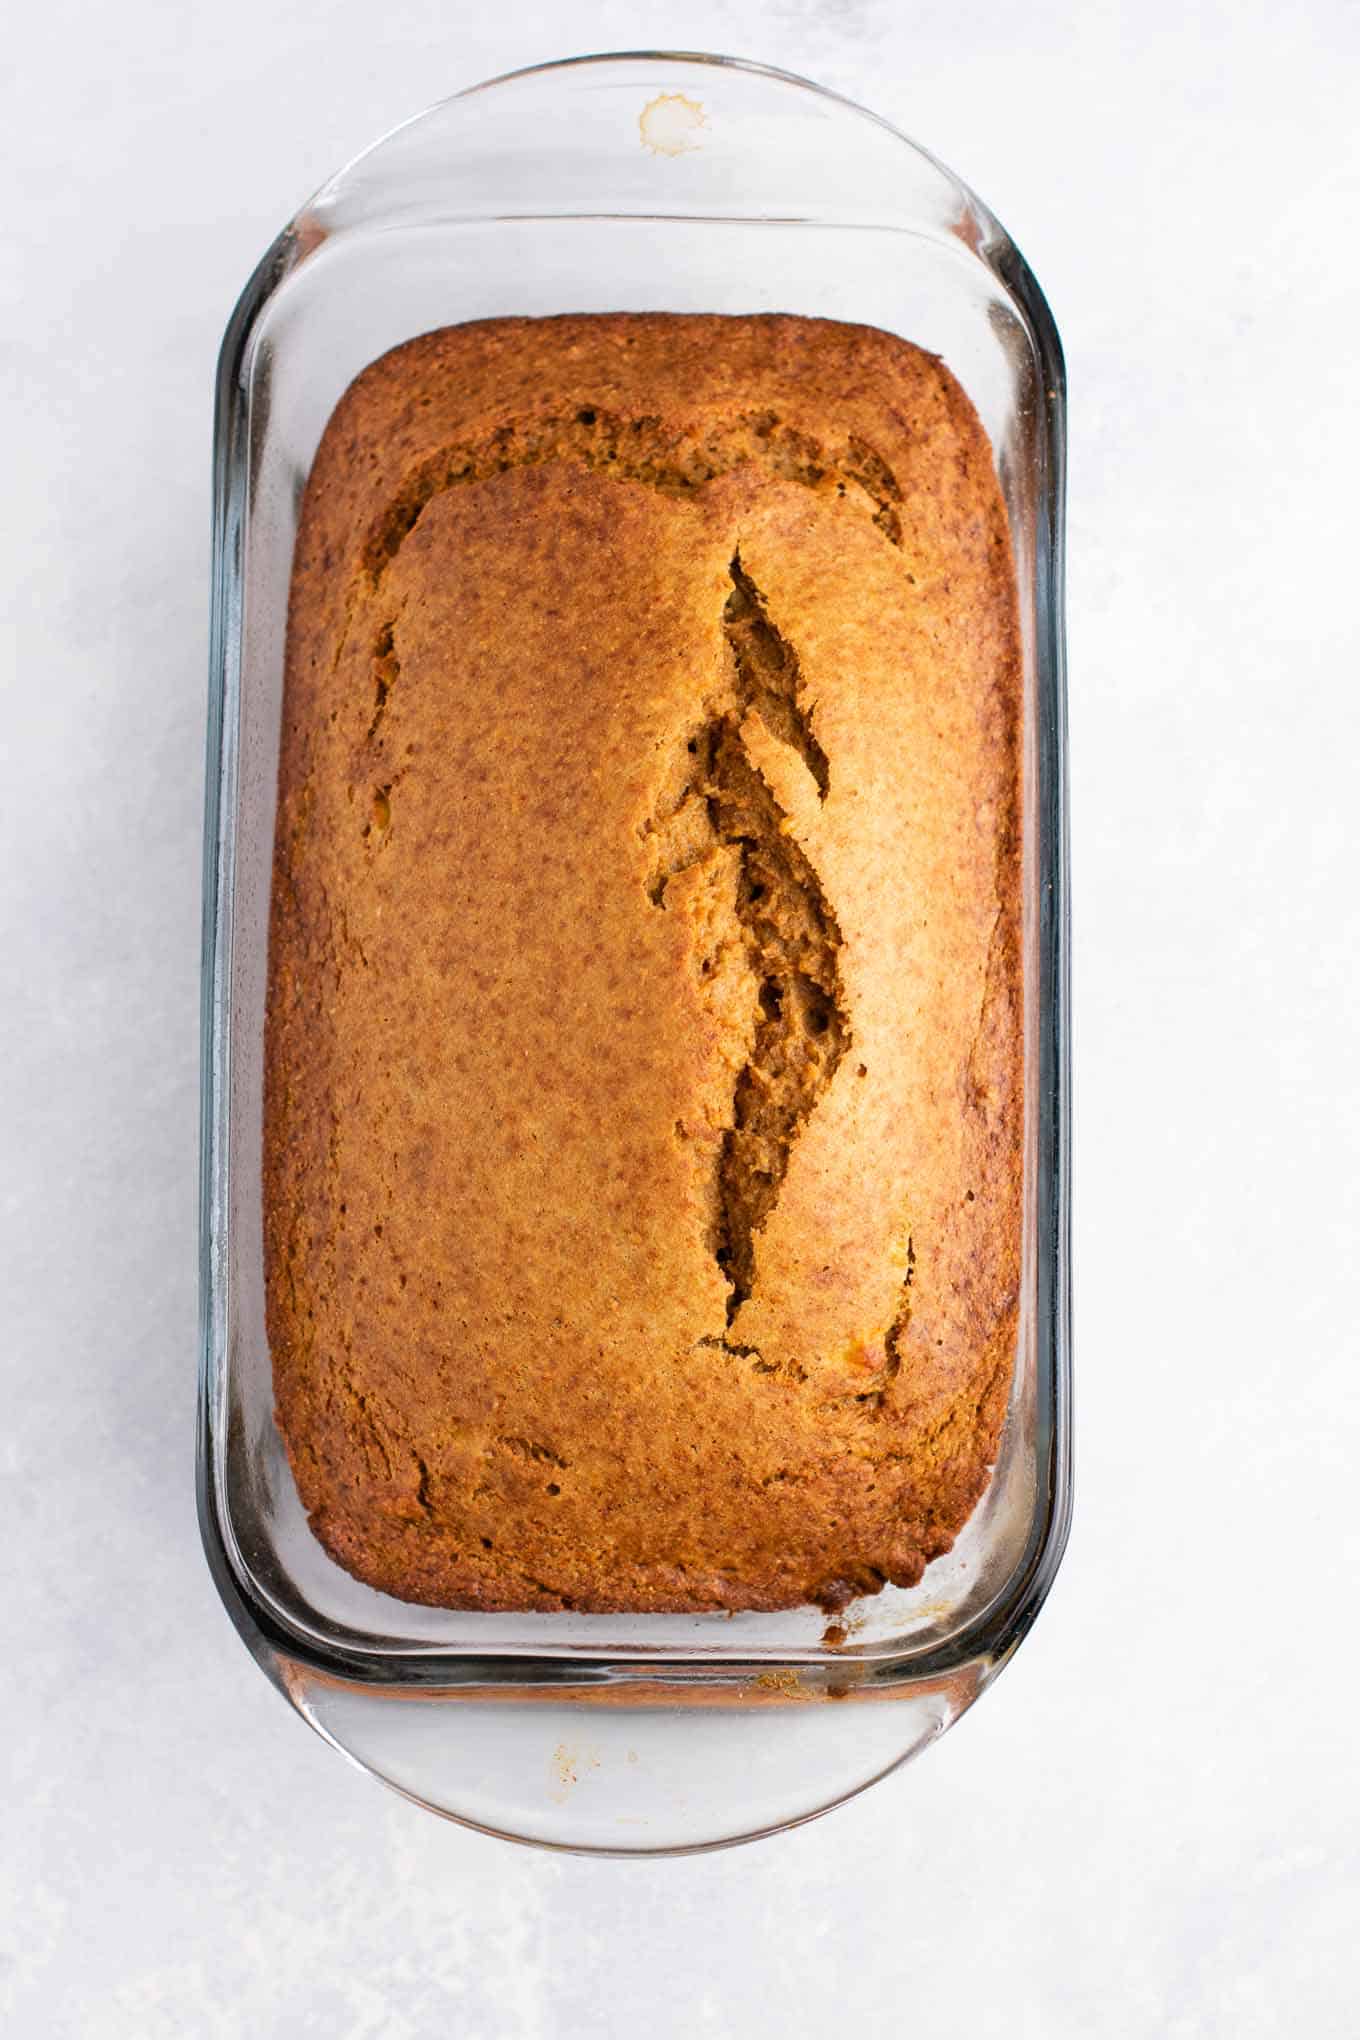 perfect whole wheat banana bread - banana bread with whole wheat flour. Oil free, dairy free, and so delicious! #bananabread #wholewheatbananabread #bananbreadrecipe #healthy #dairyfree #oilfree